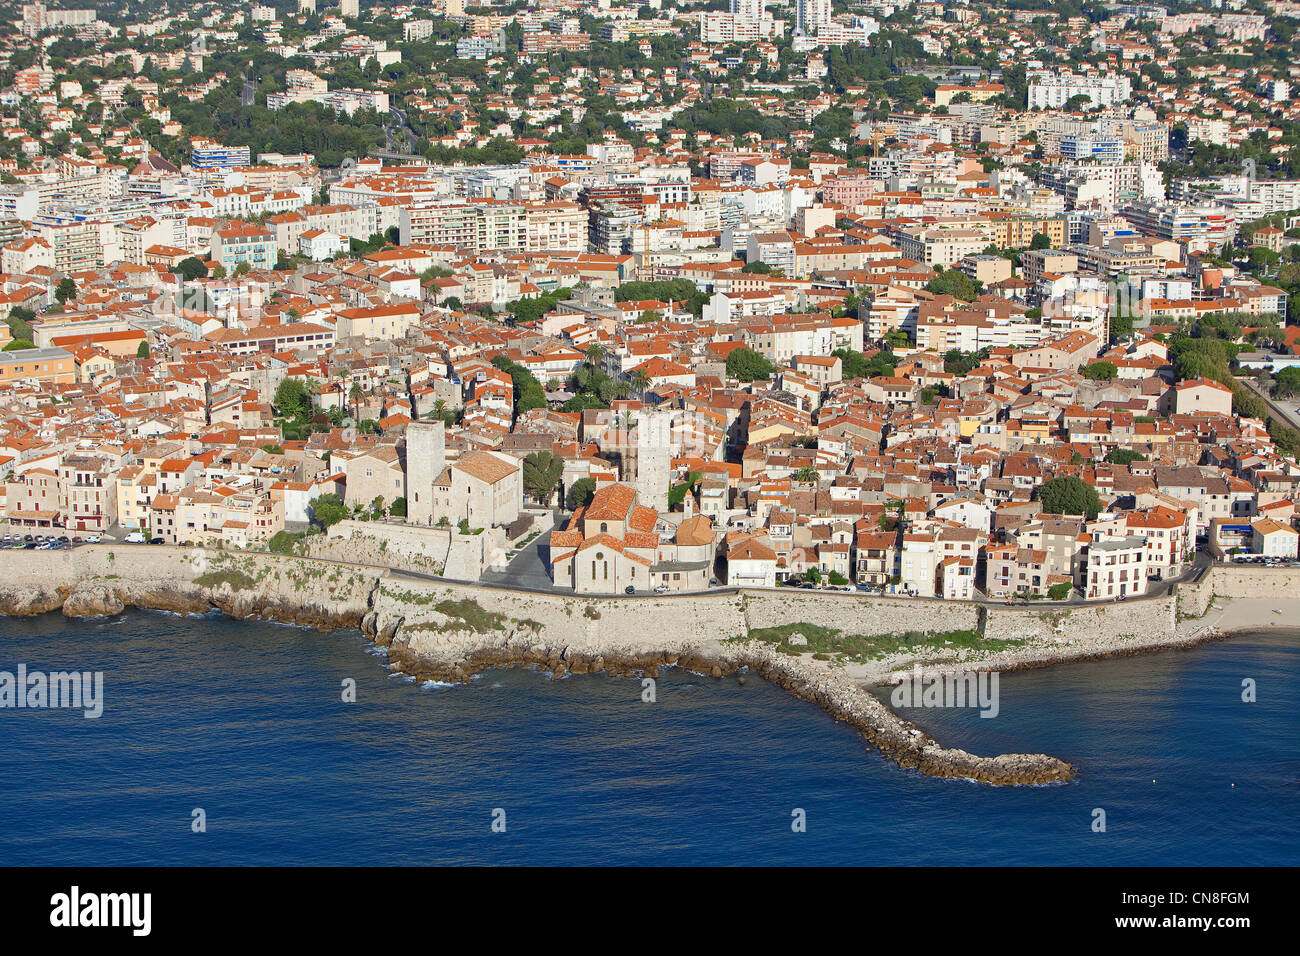 France, Alpes Maritimes, Antibes, old town and Cathedral Notre Dame de la Plata in the foreground (aerial view) Stock Photo